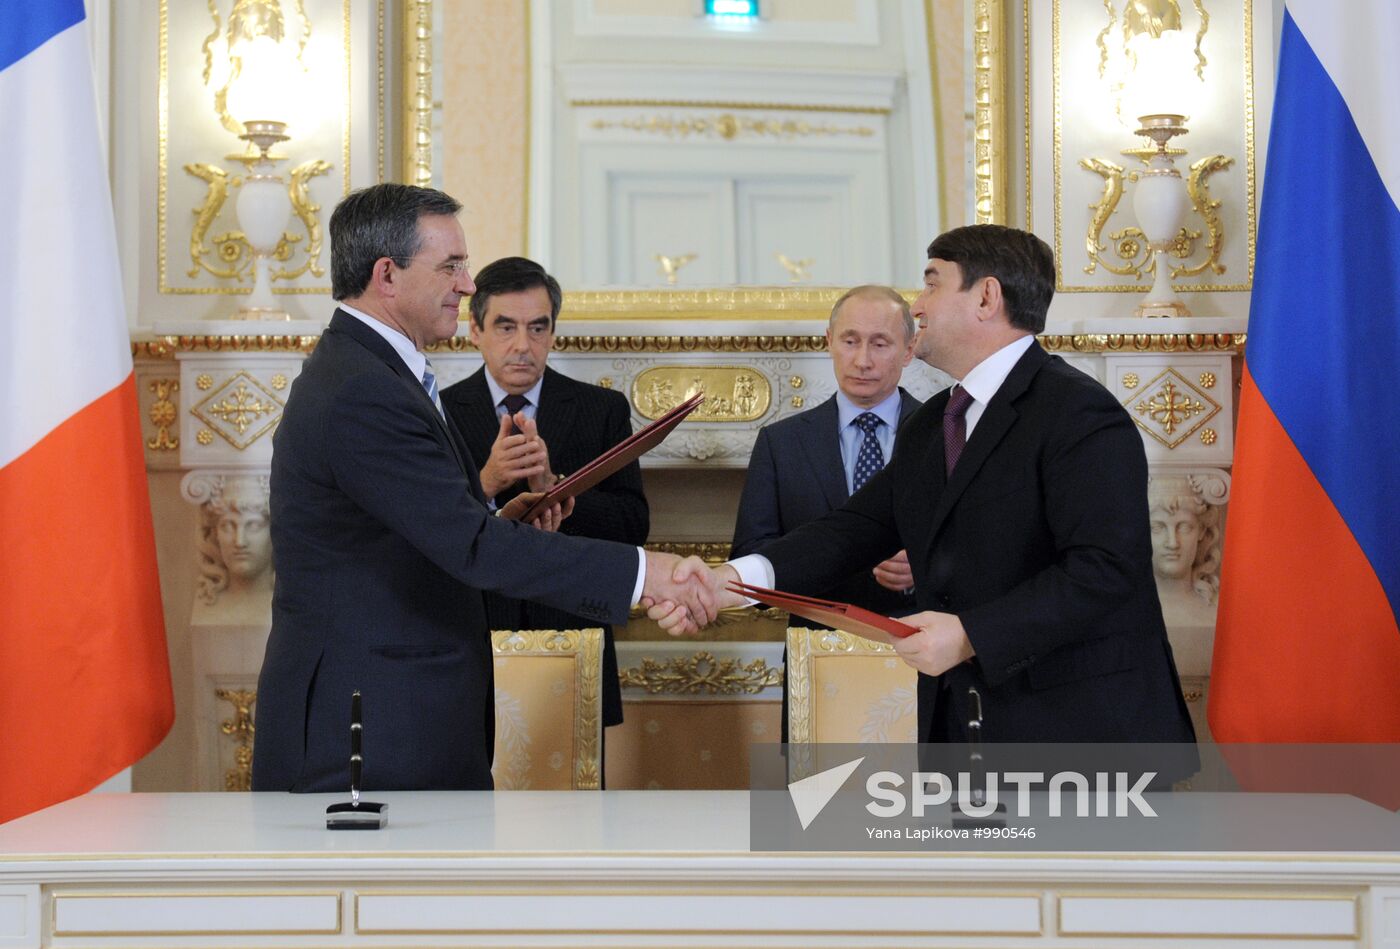 Joint press conference with Francois Fillon and Vladimir Putin